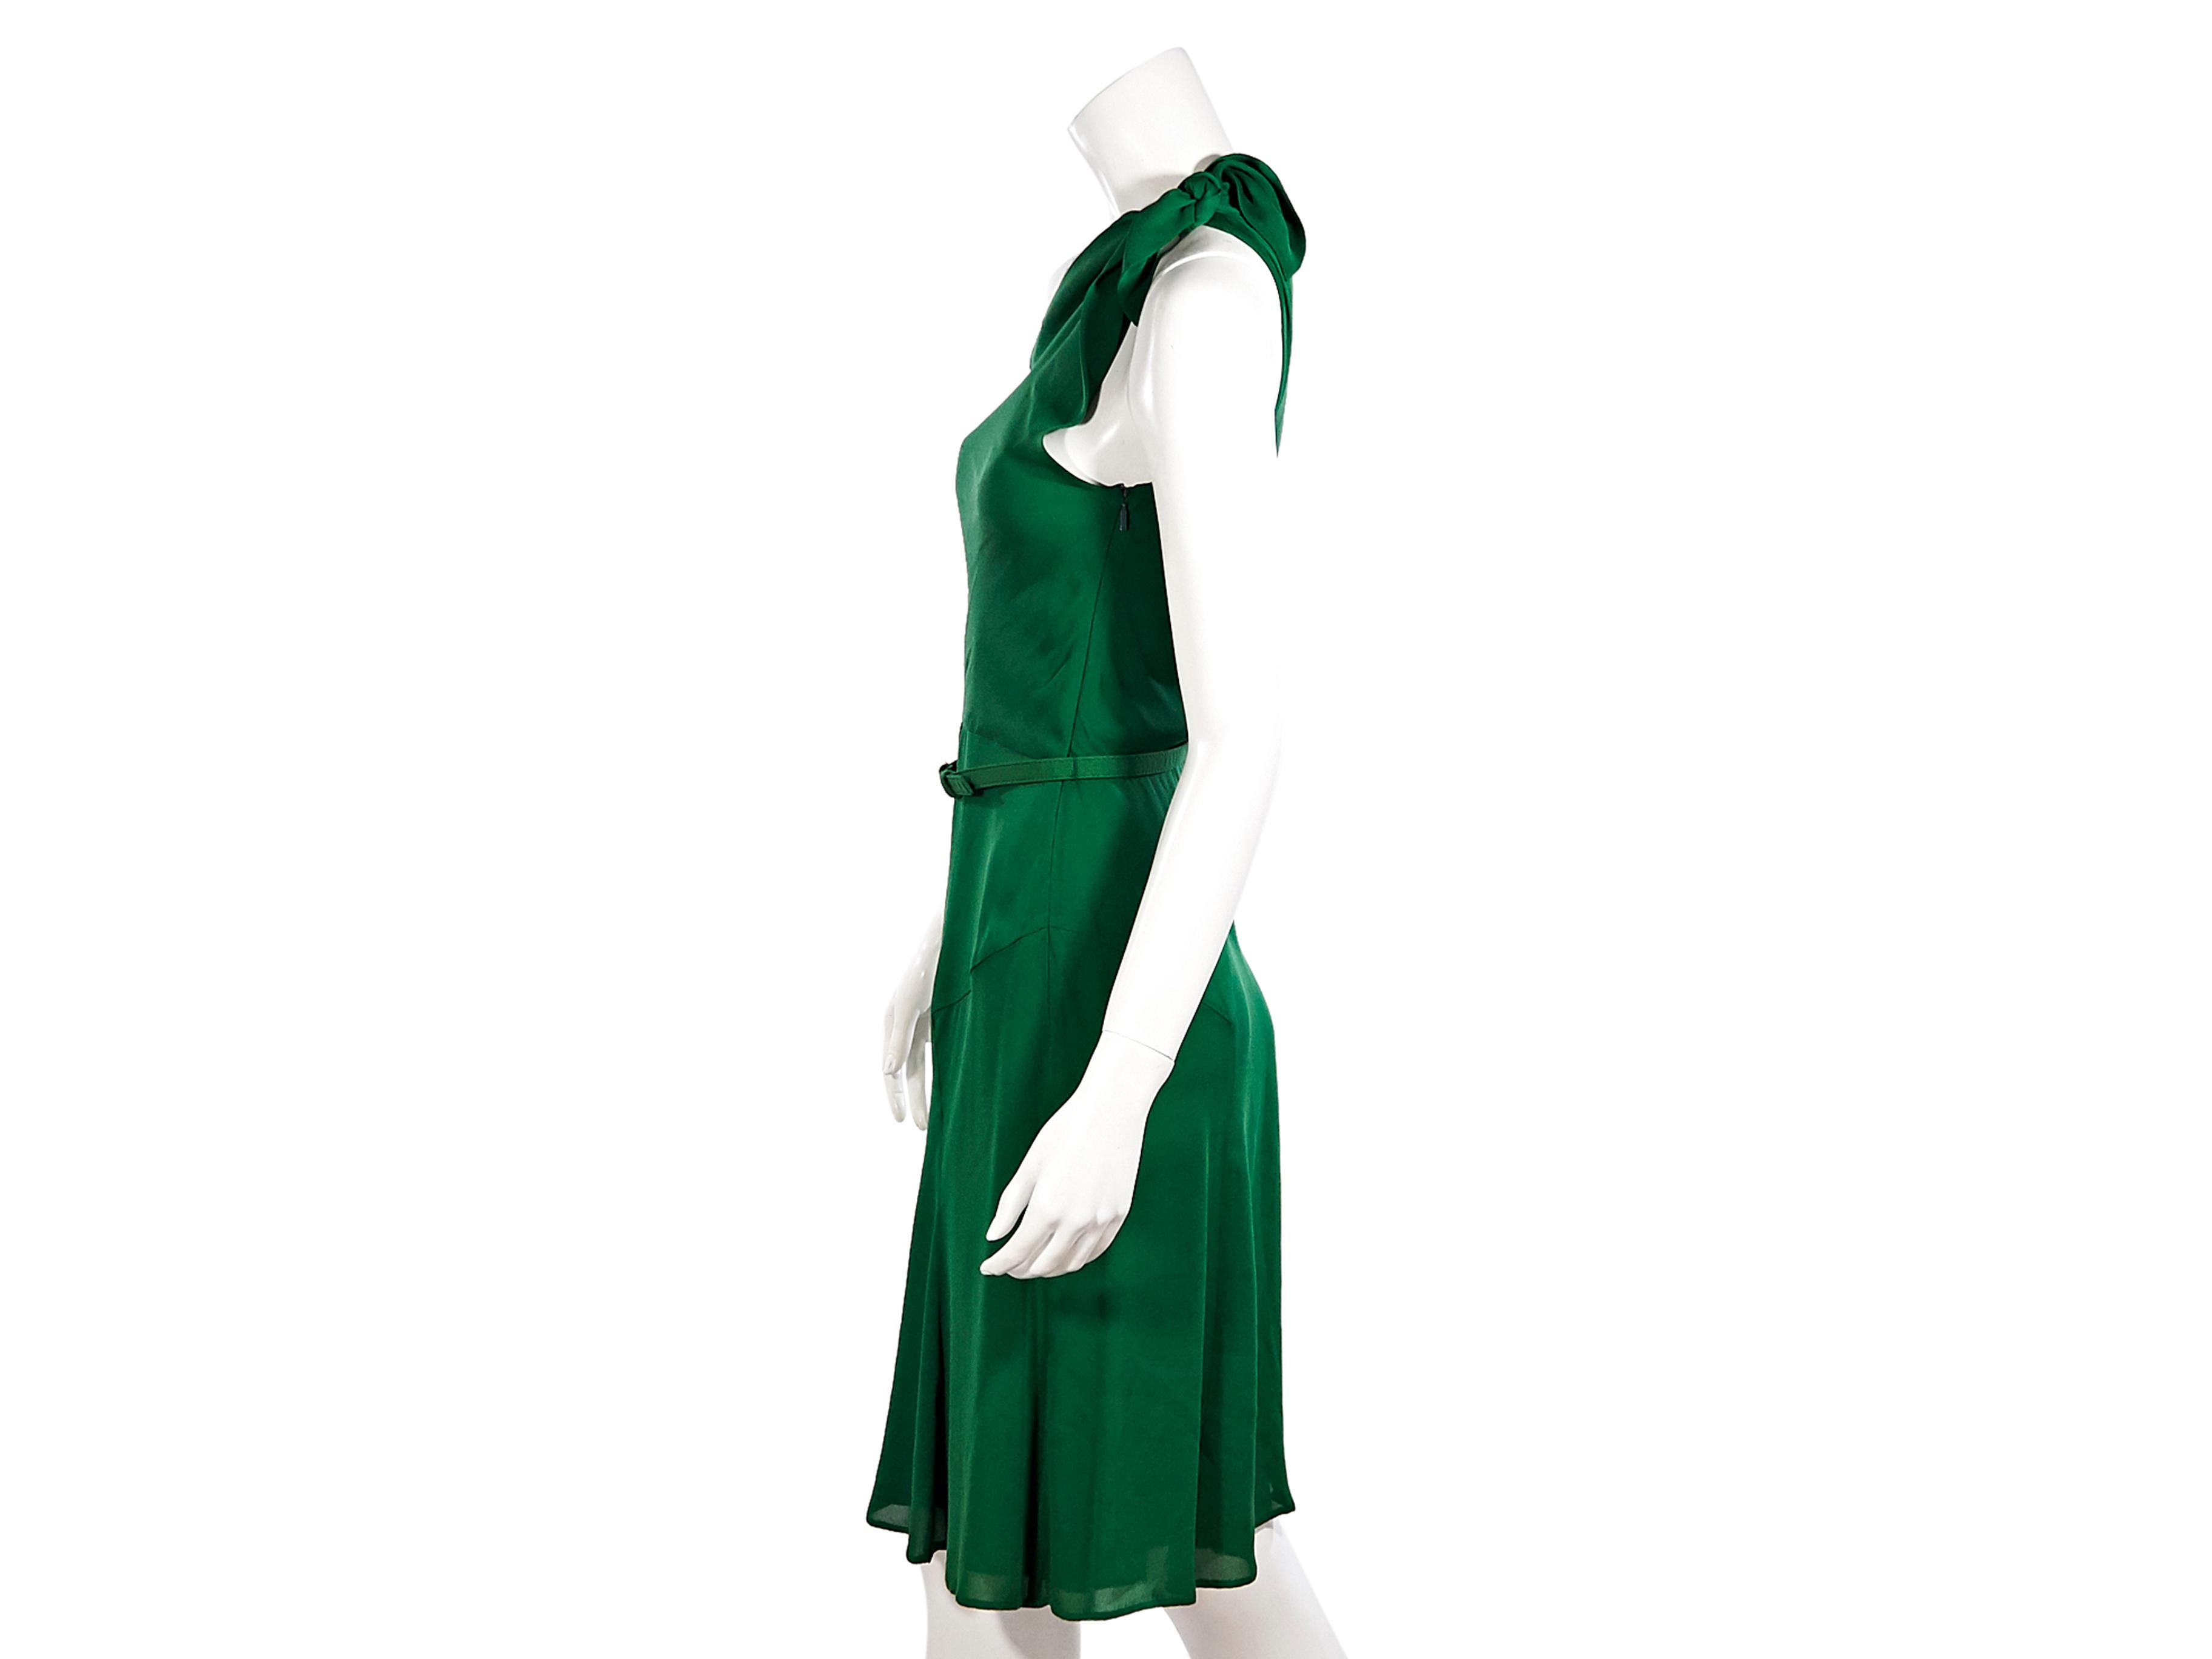 Product details:  Green silk one-shoulder dress by Gucci.  Sleeveless.  Adjustable belted waist.  Concealed side zip closure.  Label size IT 40.  32